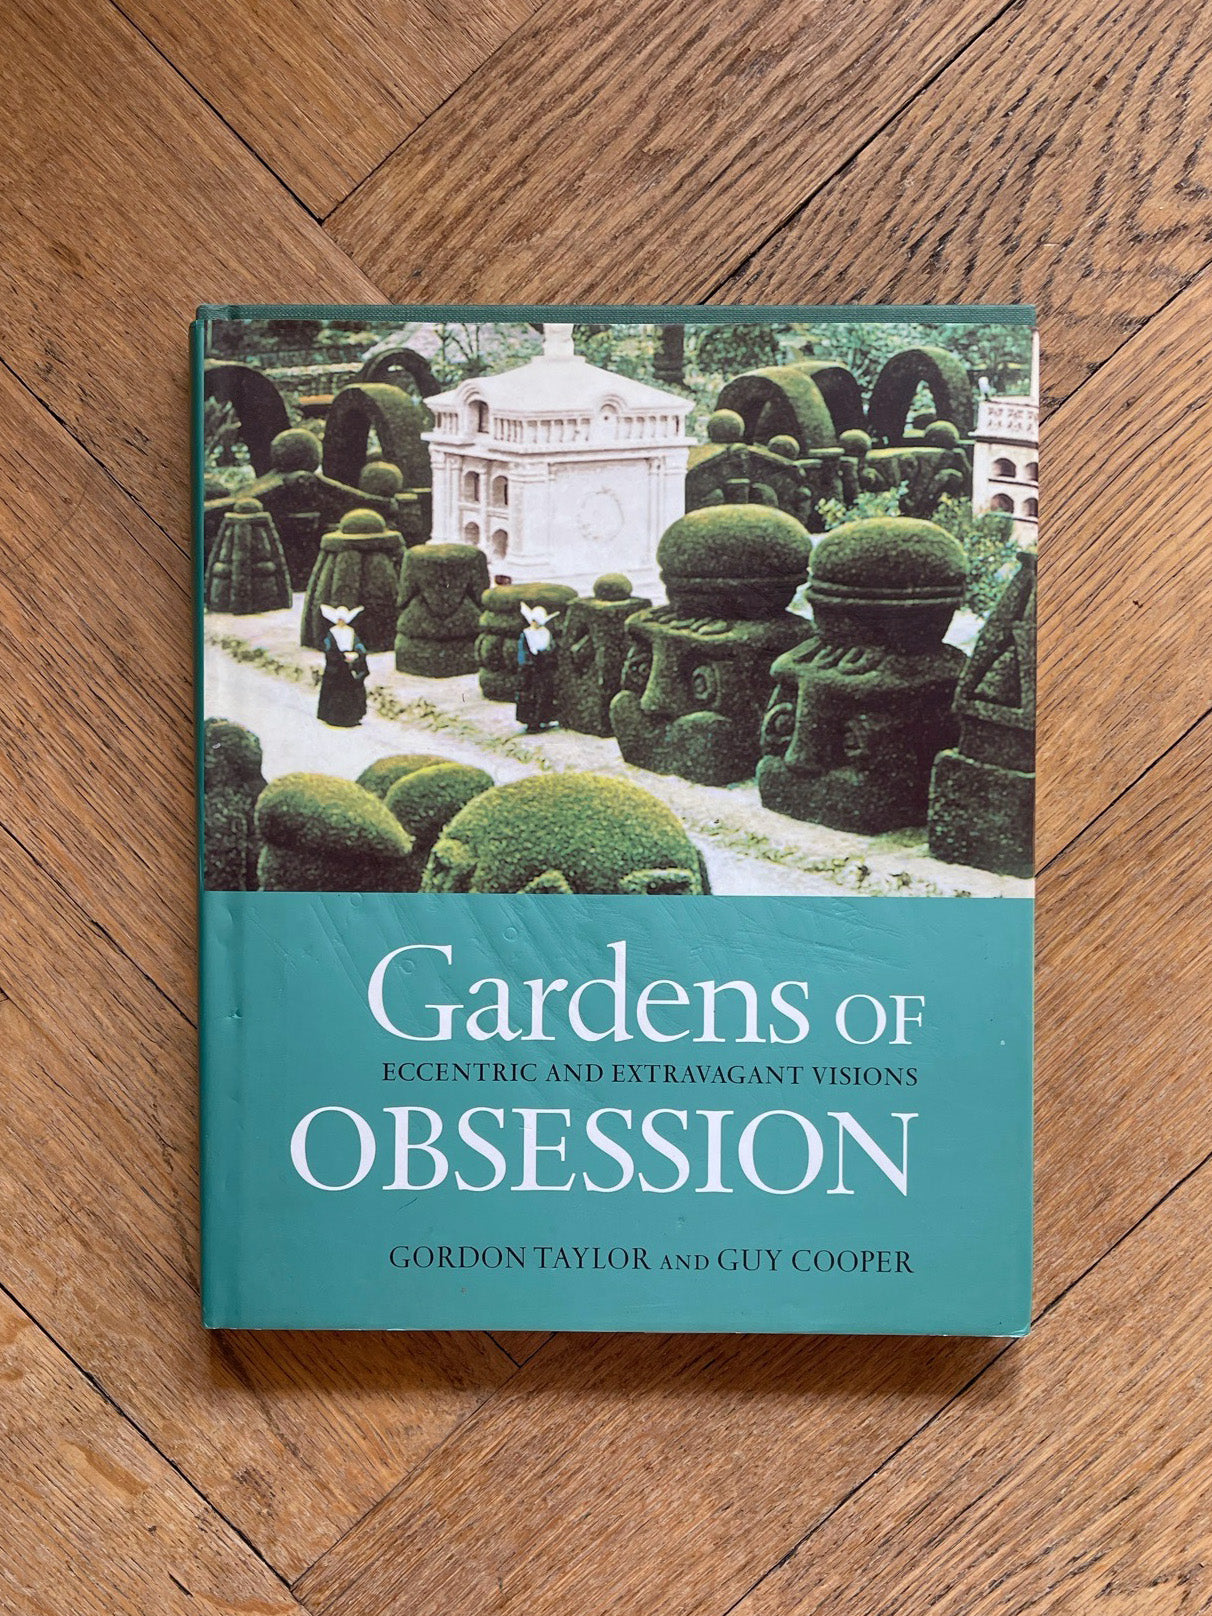 Gardens of Obsession by Gordon Taylor and Guy Cooper